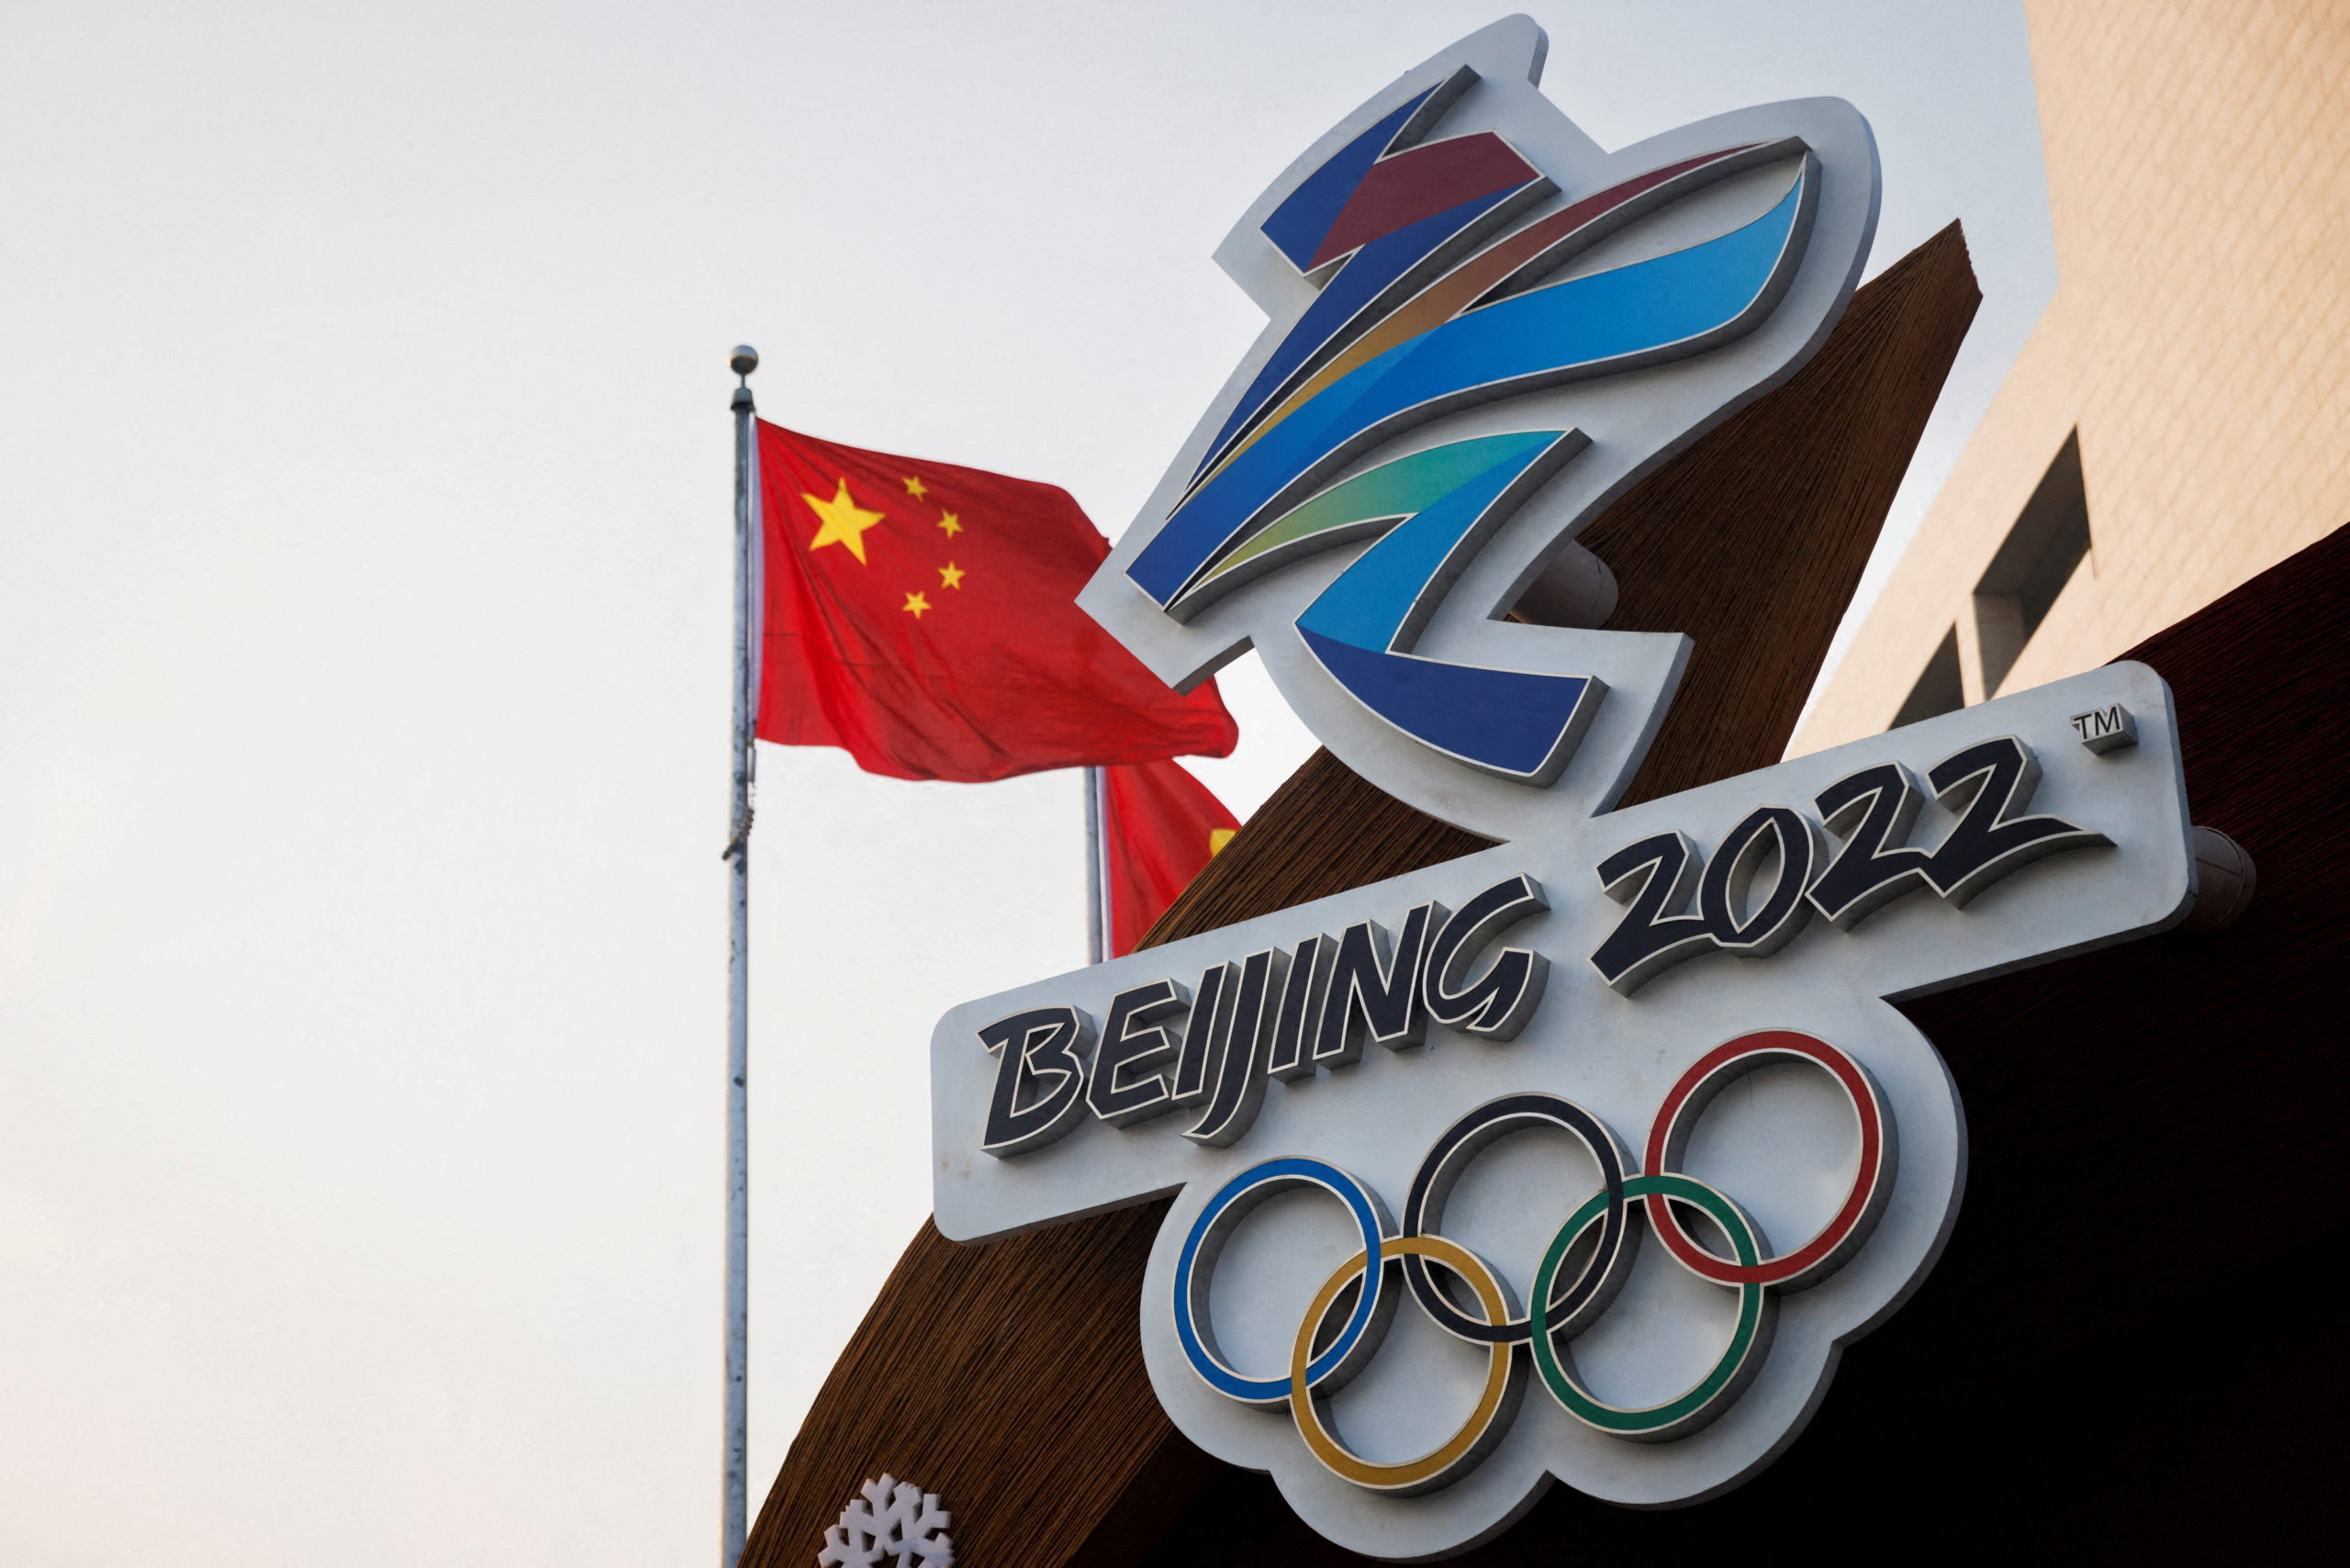 FILE PHOTO: The Chinese national flag flies behind the logo of the Beijing 2022 Winter Olympics in Beijing, China, January 14, 2022. REUTERS/Thomas Peter/File Photo